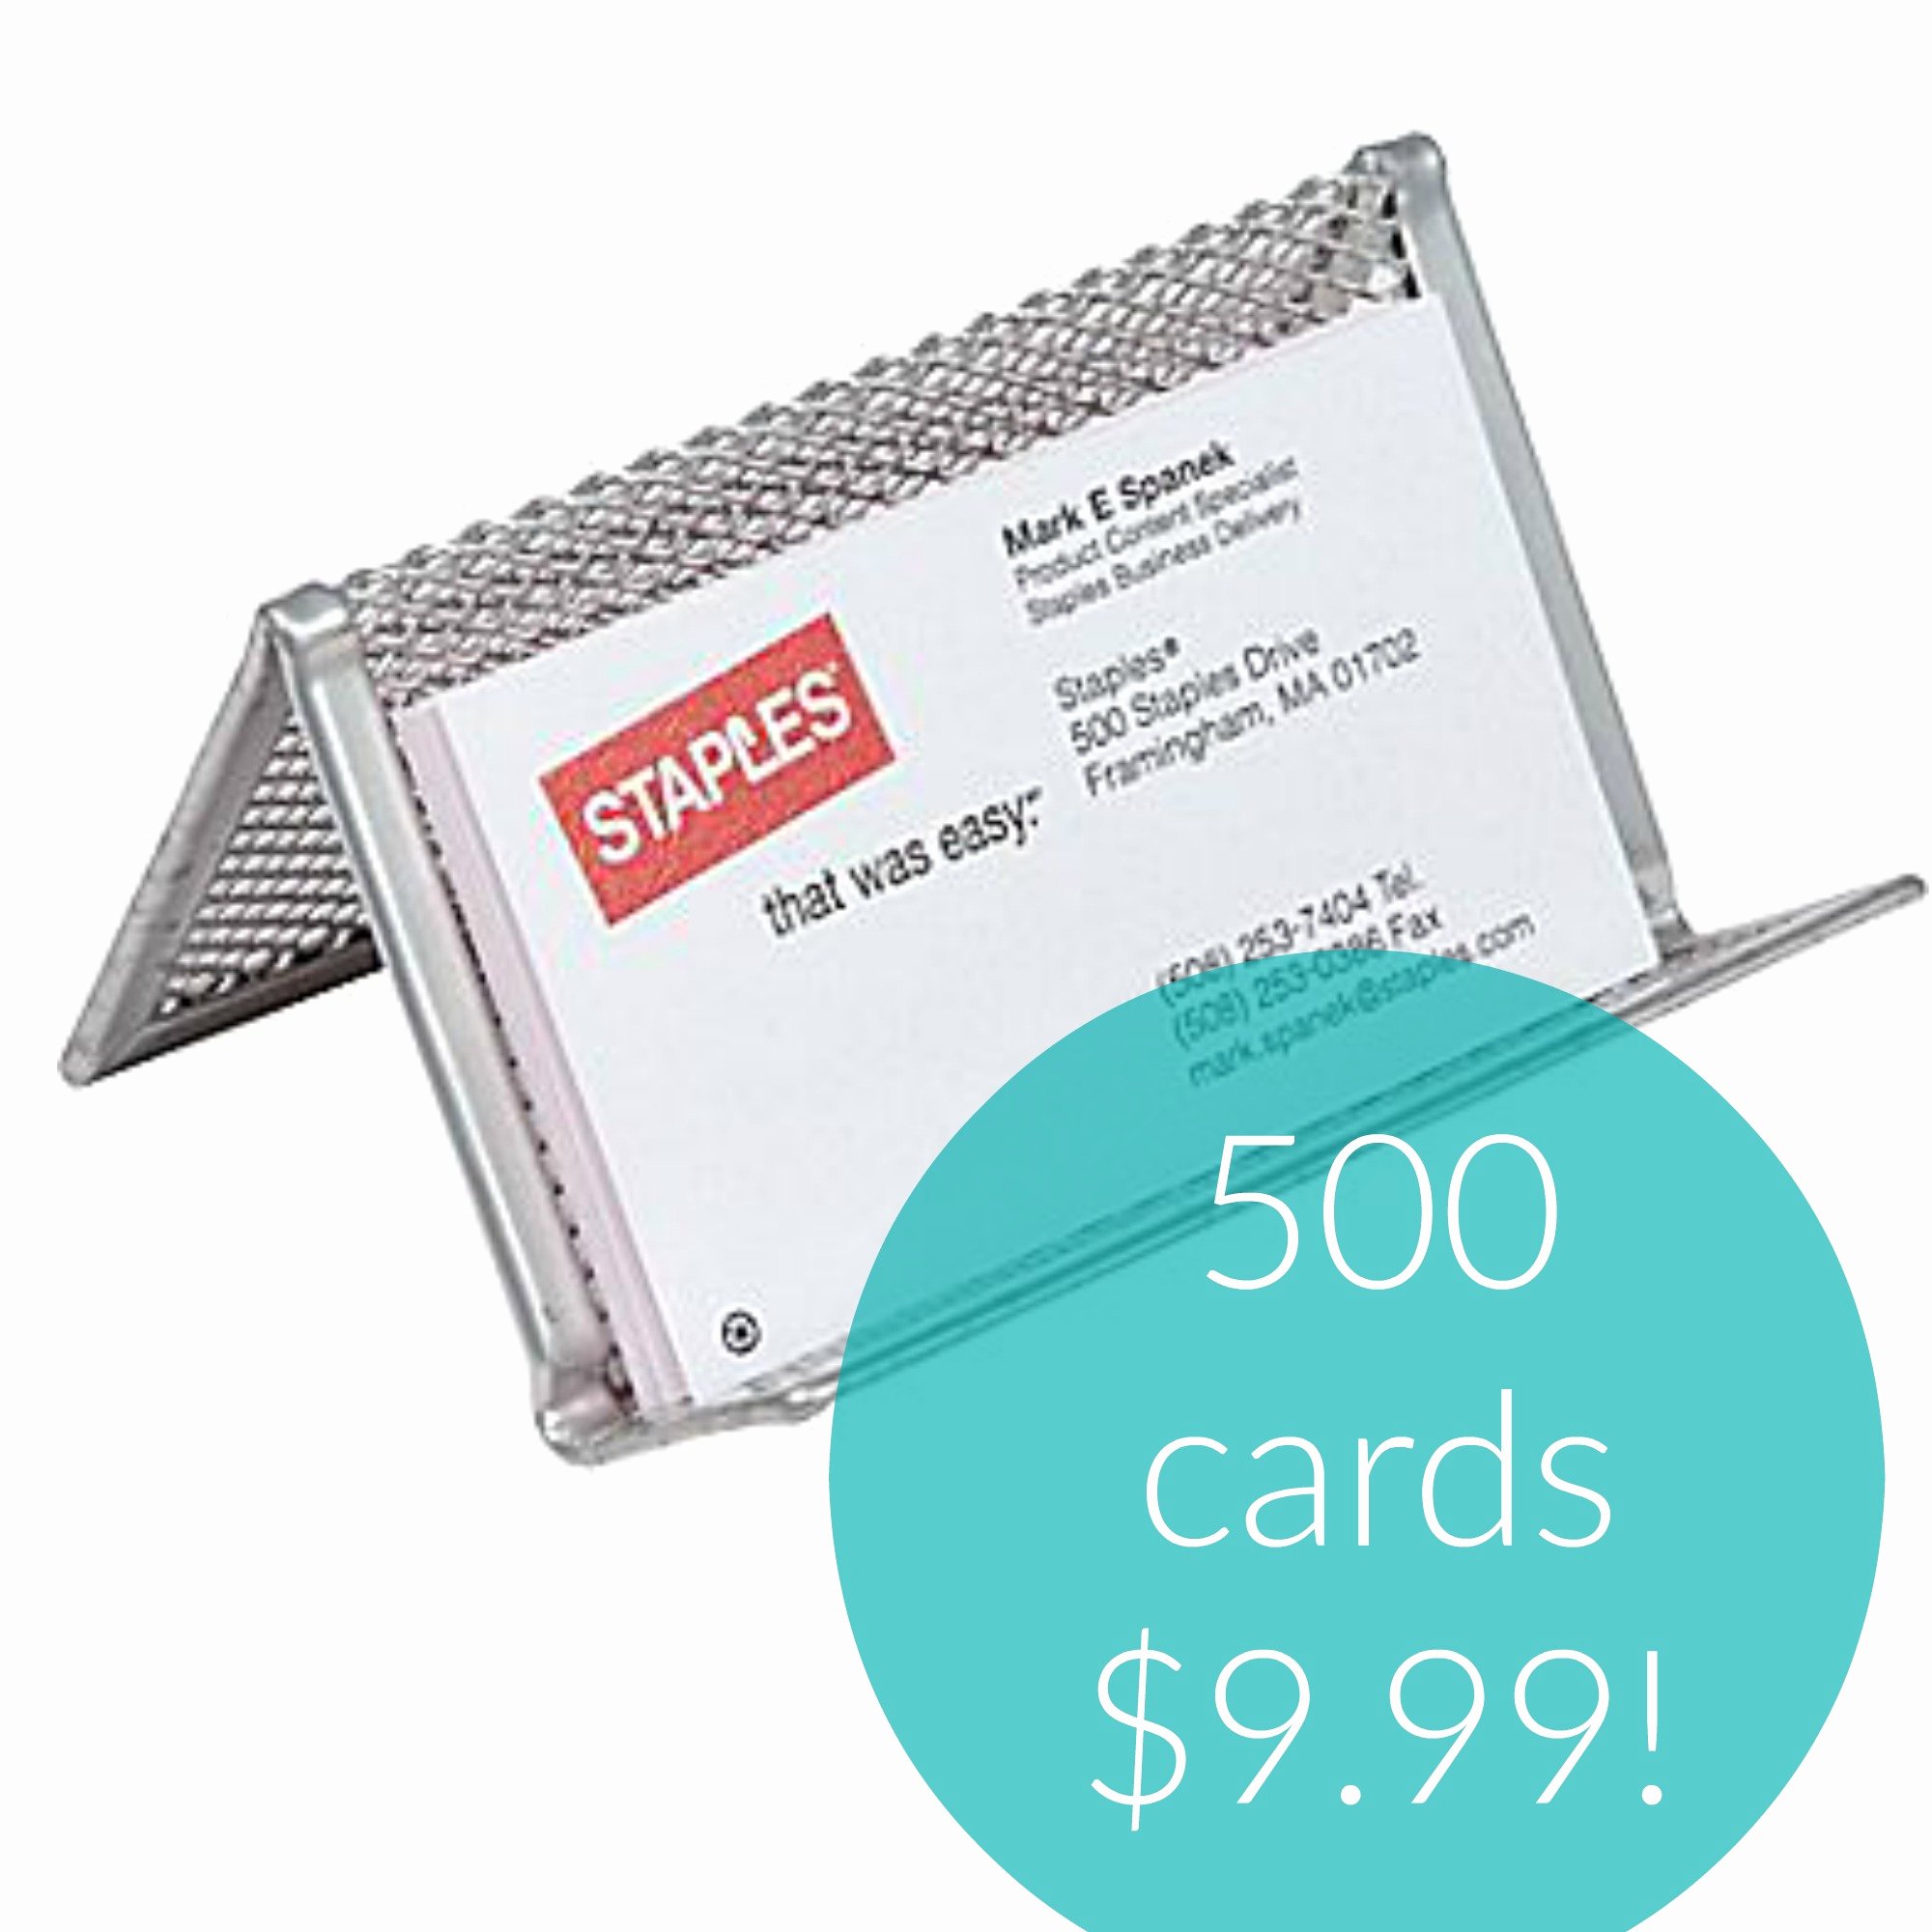 Print 500 Business Cards for Ly $9 99 at Staples Great